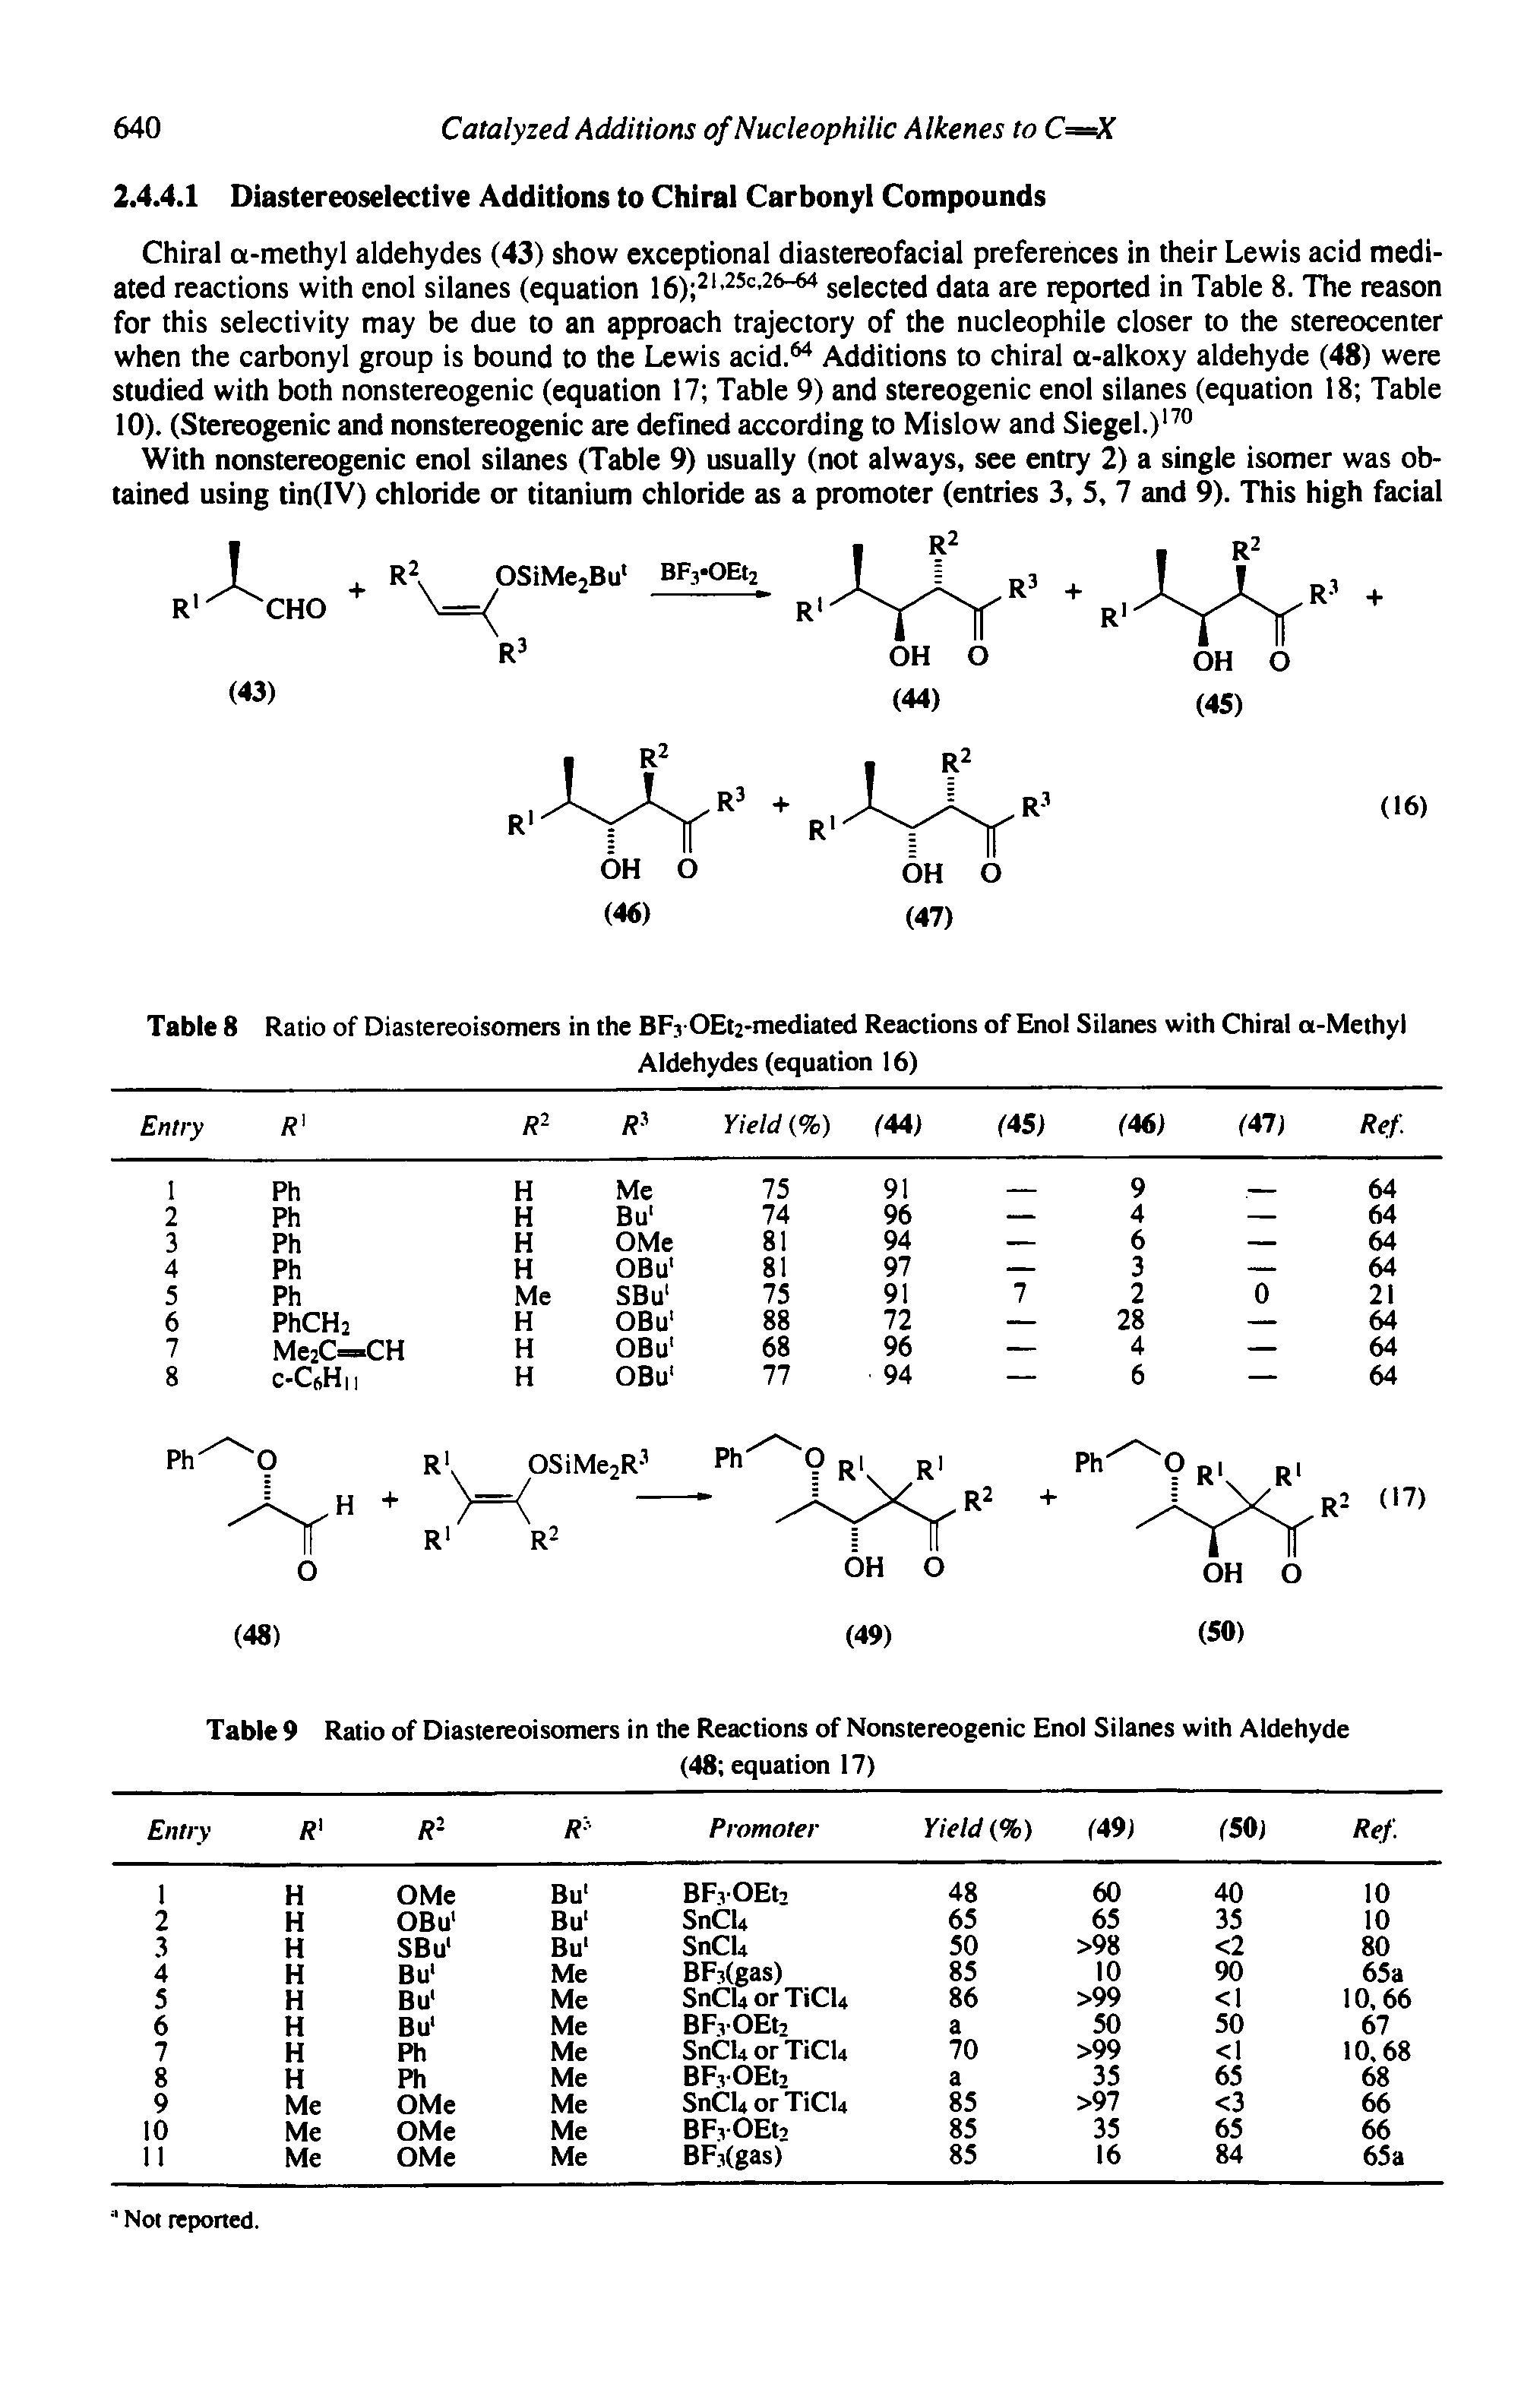 Table 9 Ratio of Diastereoisomers in the Reactions of Nonstereogenic Enol Silanes with Aldehyde...